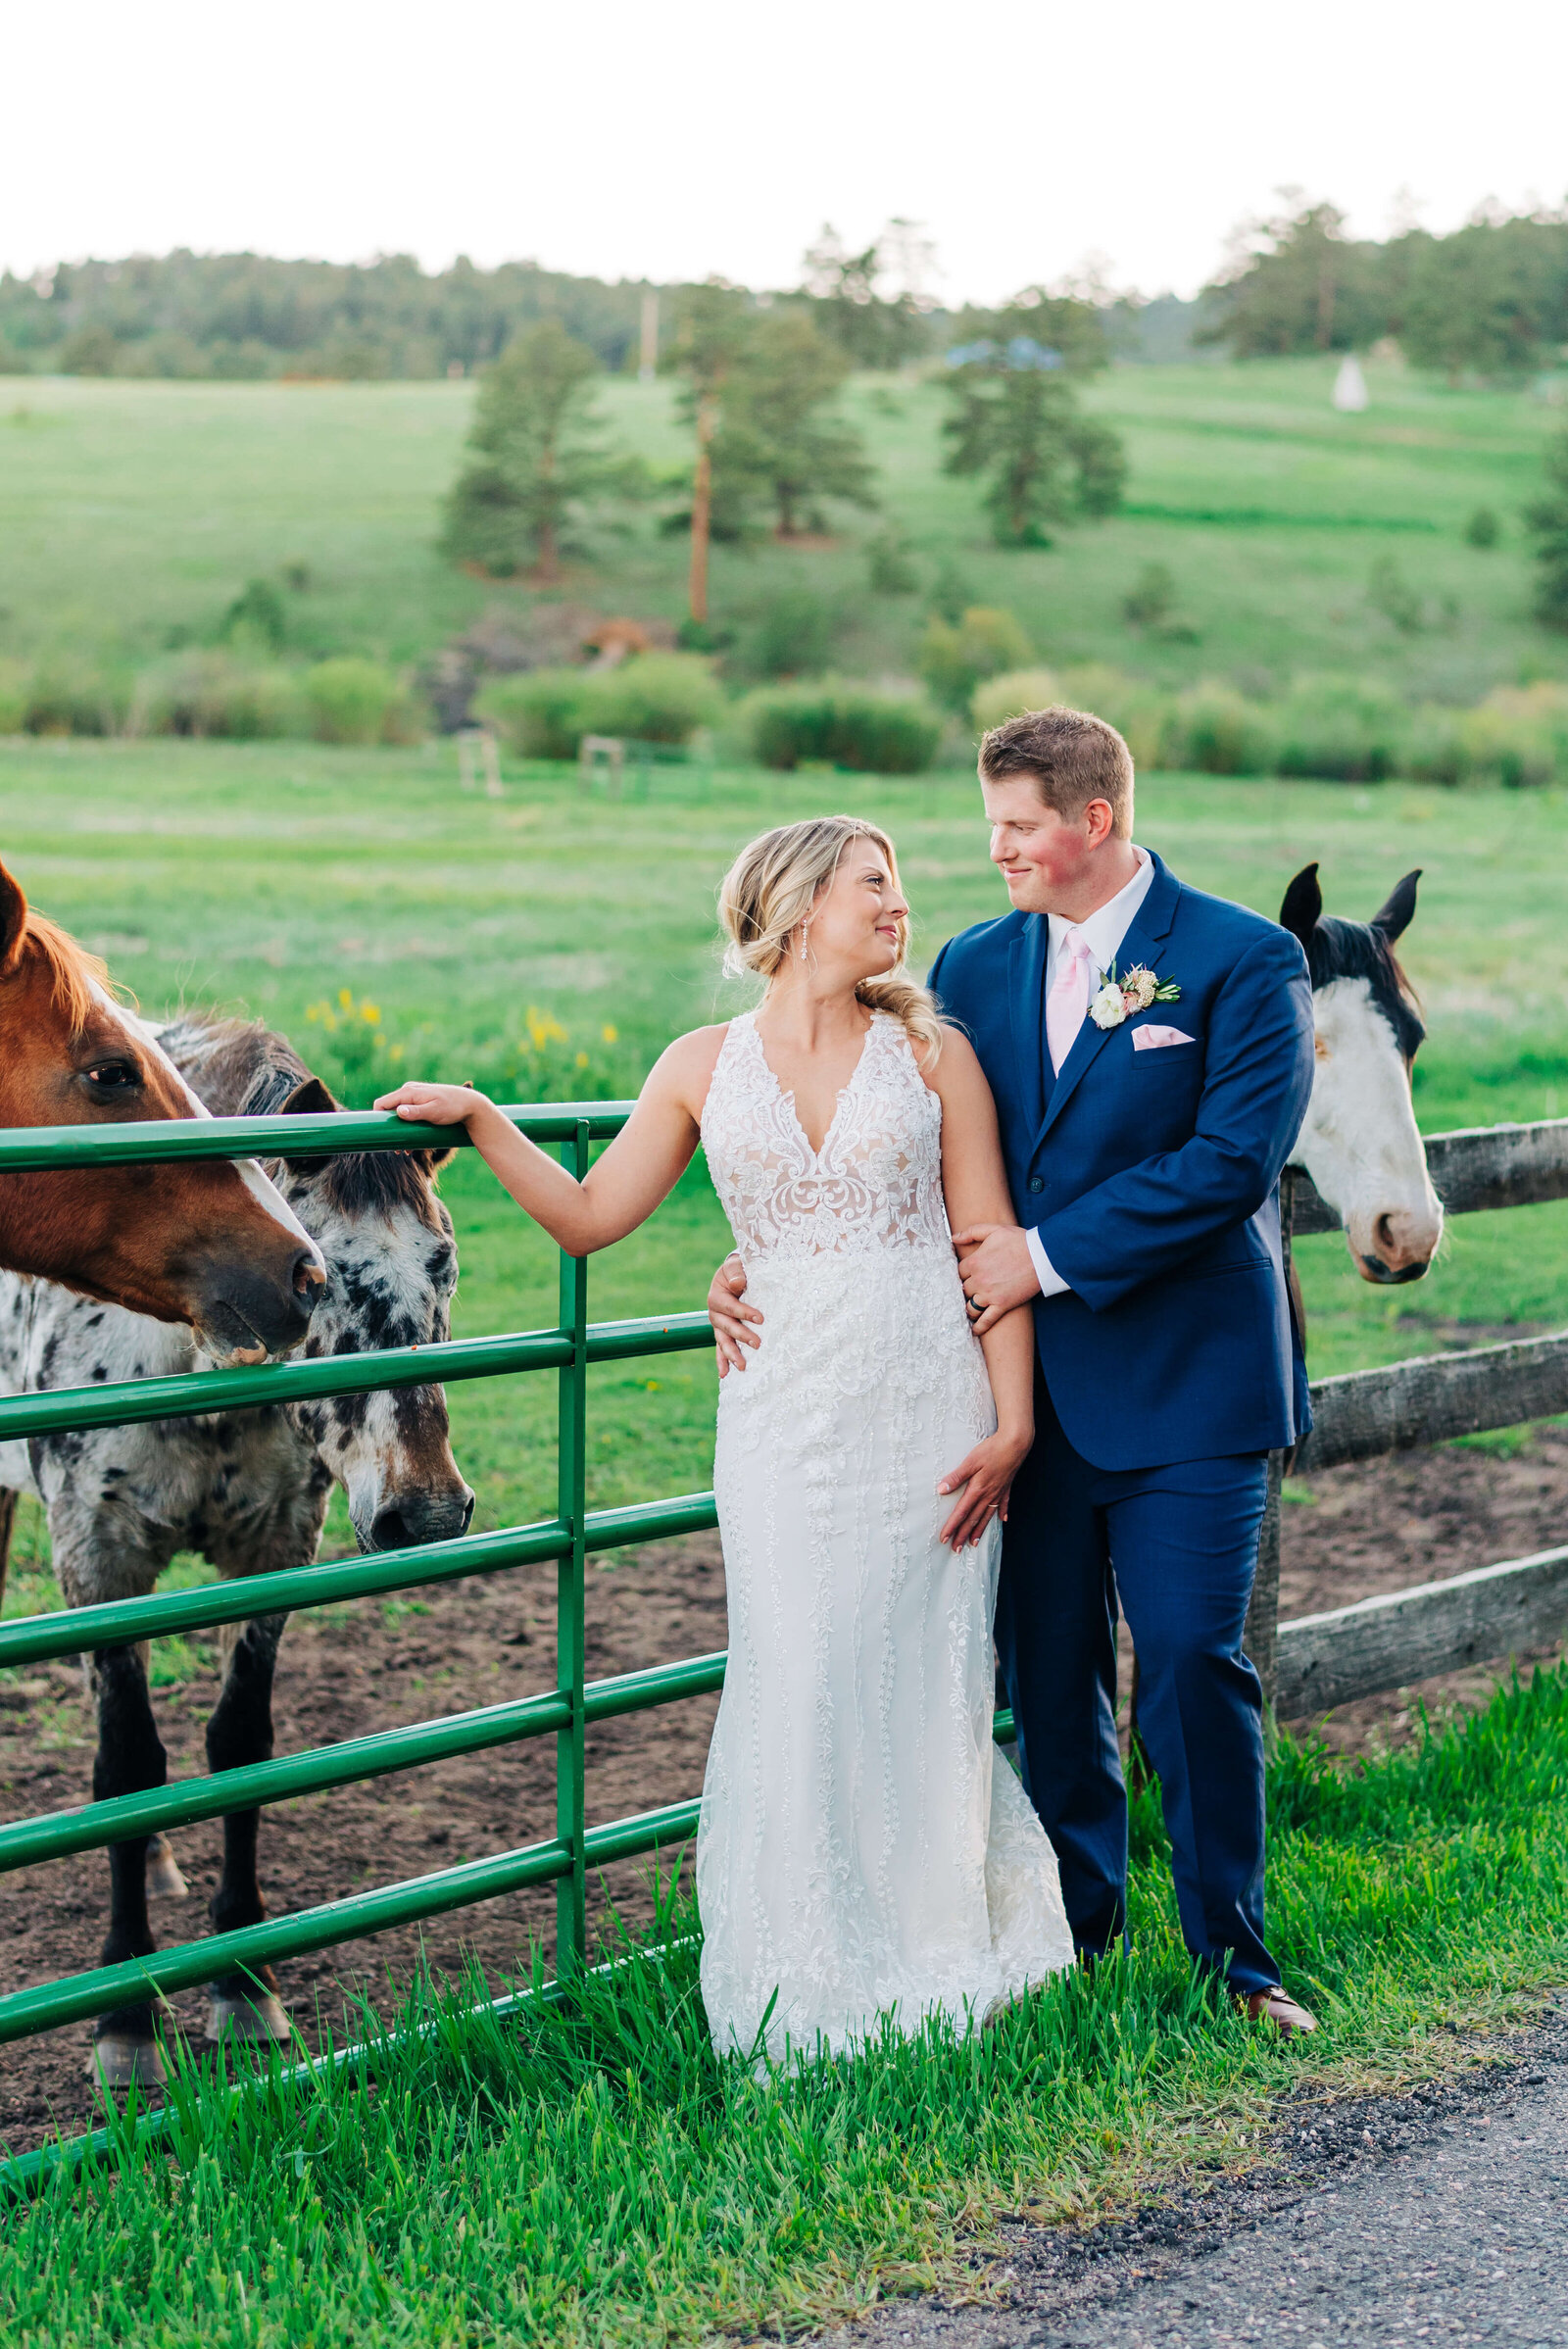 Virginia wedding photographer captures image of bride and groom standing together and admiring each other and the horses